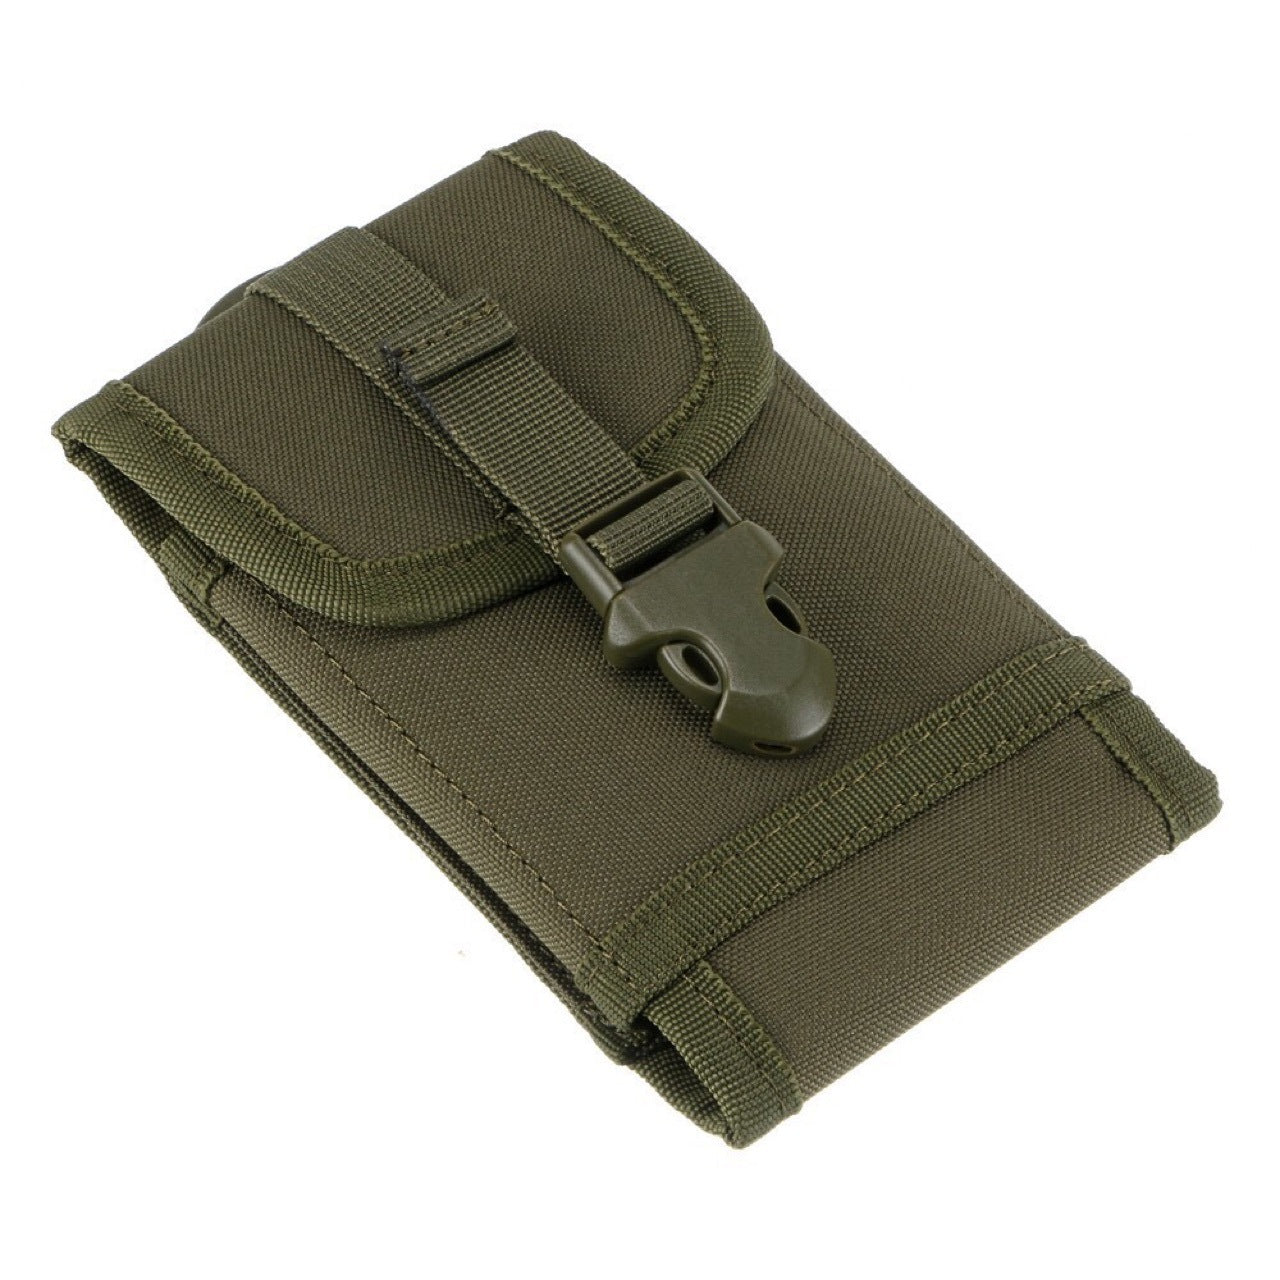 Molle multipurpose waist pack for a mobile phone for outdoor use GBFP004